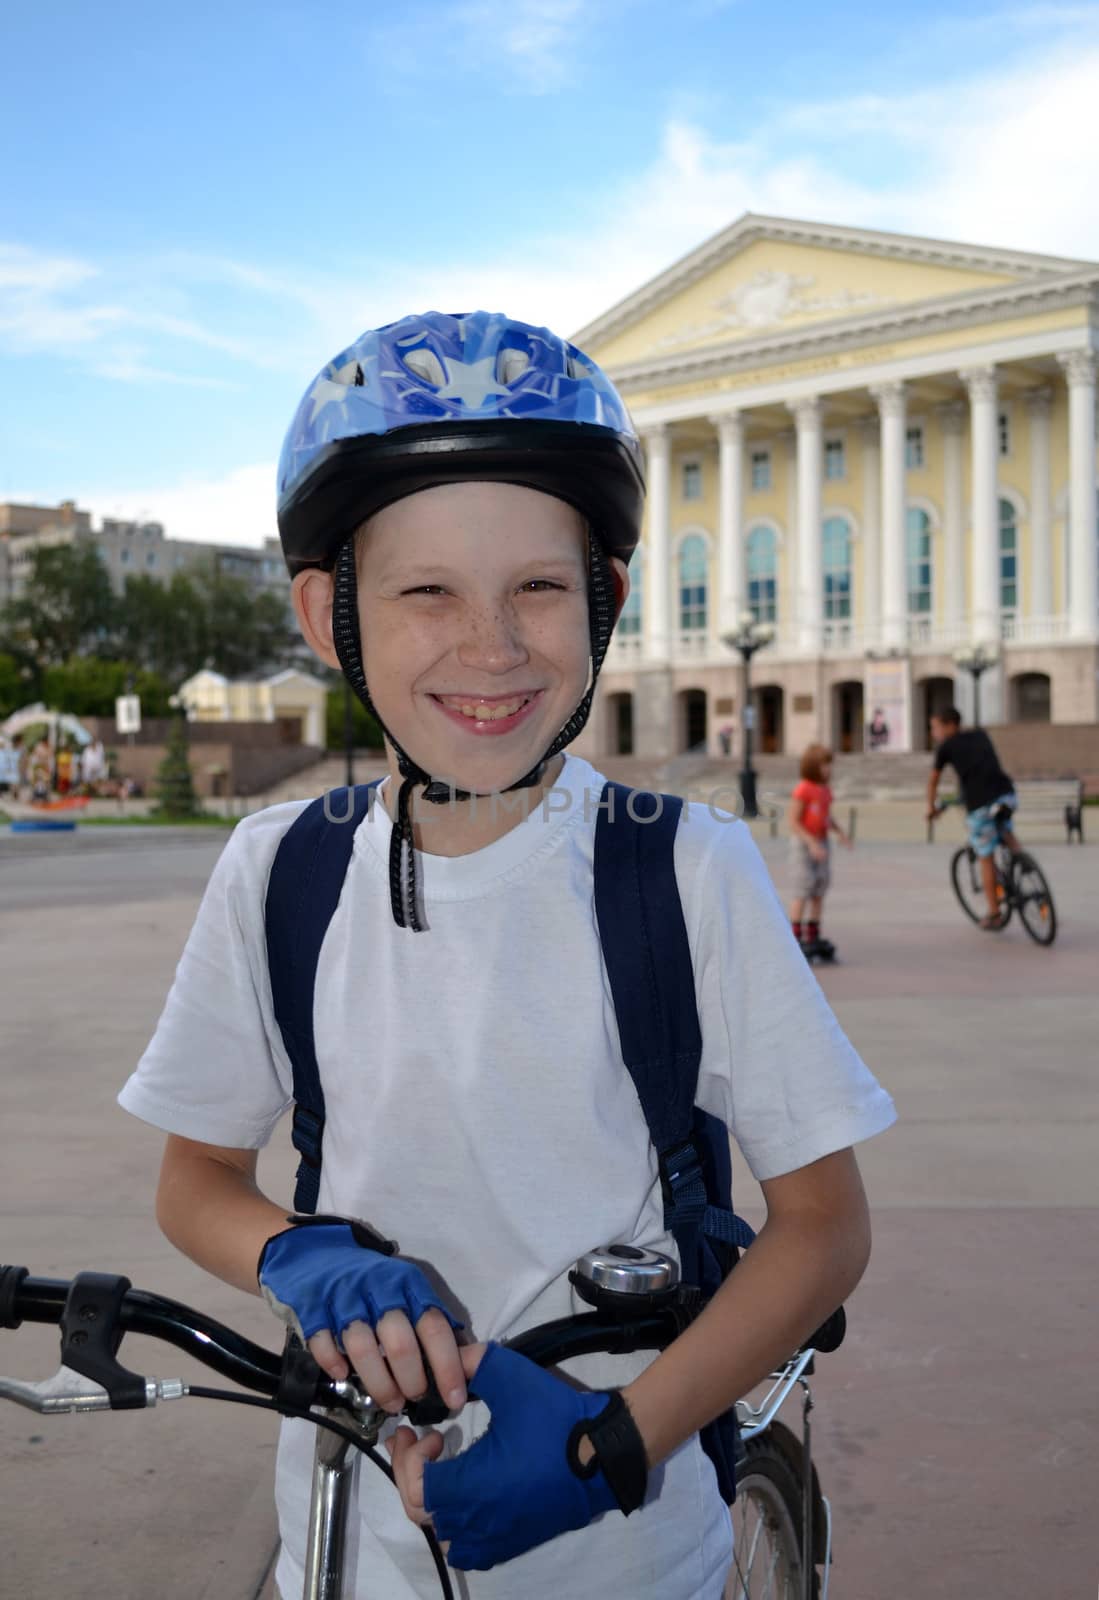 The cheerful teenager by bicycle near the Tyumen drama theater. Russia.